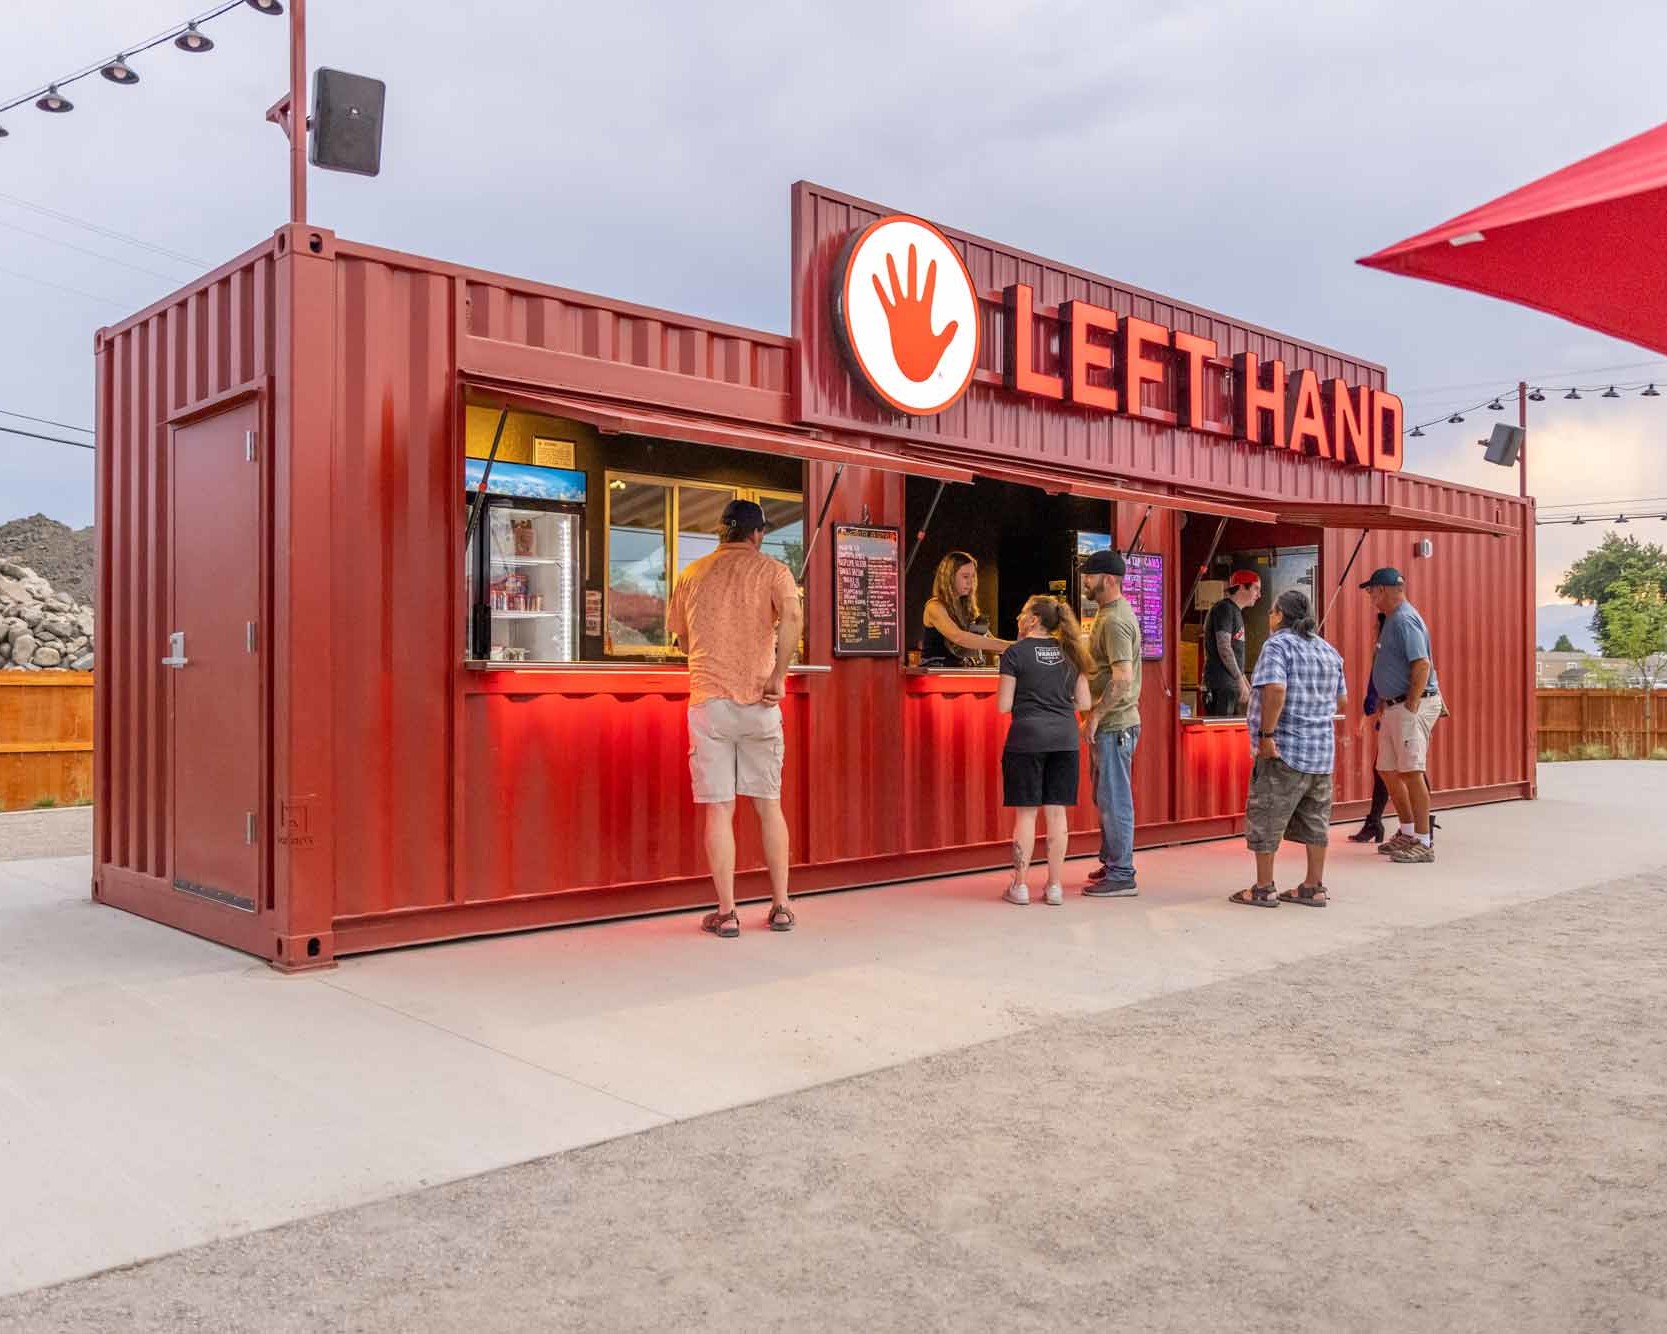 :eft Hand Brewing Company custom shipping container bar built by ROXBOX Containers.